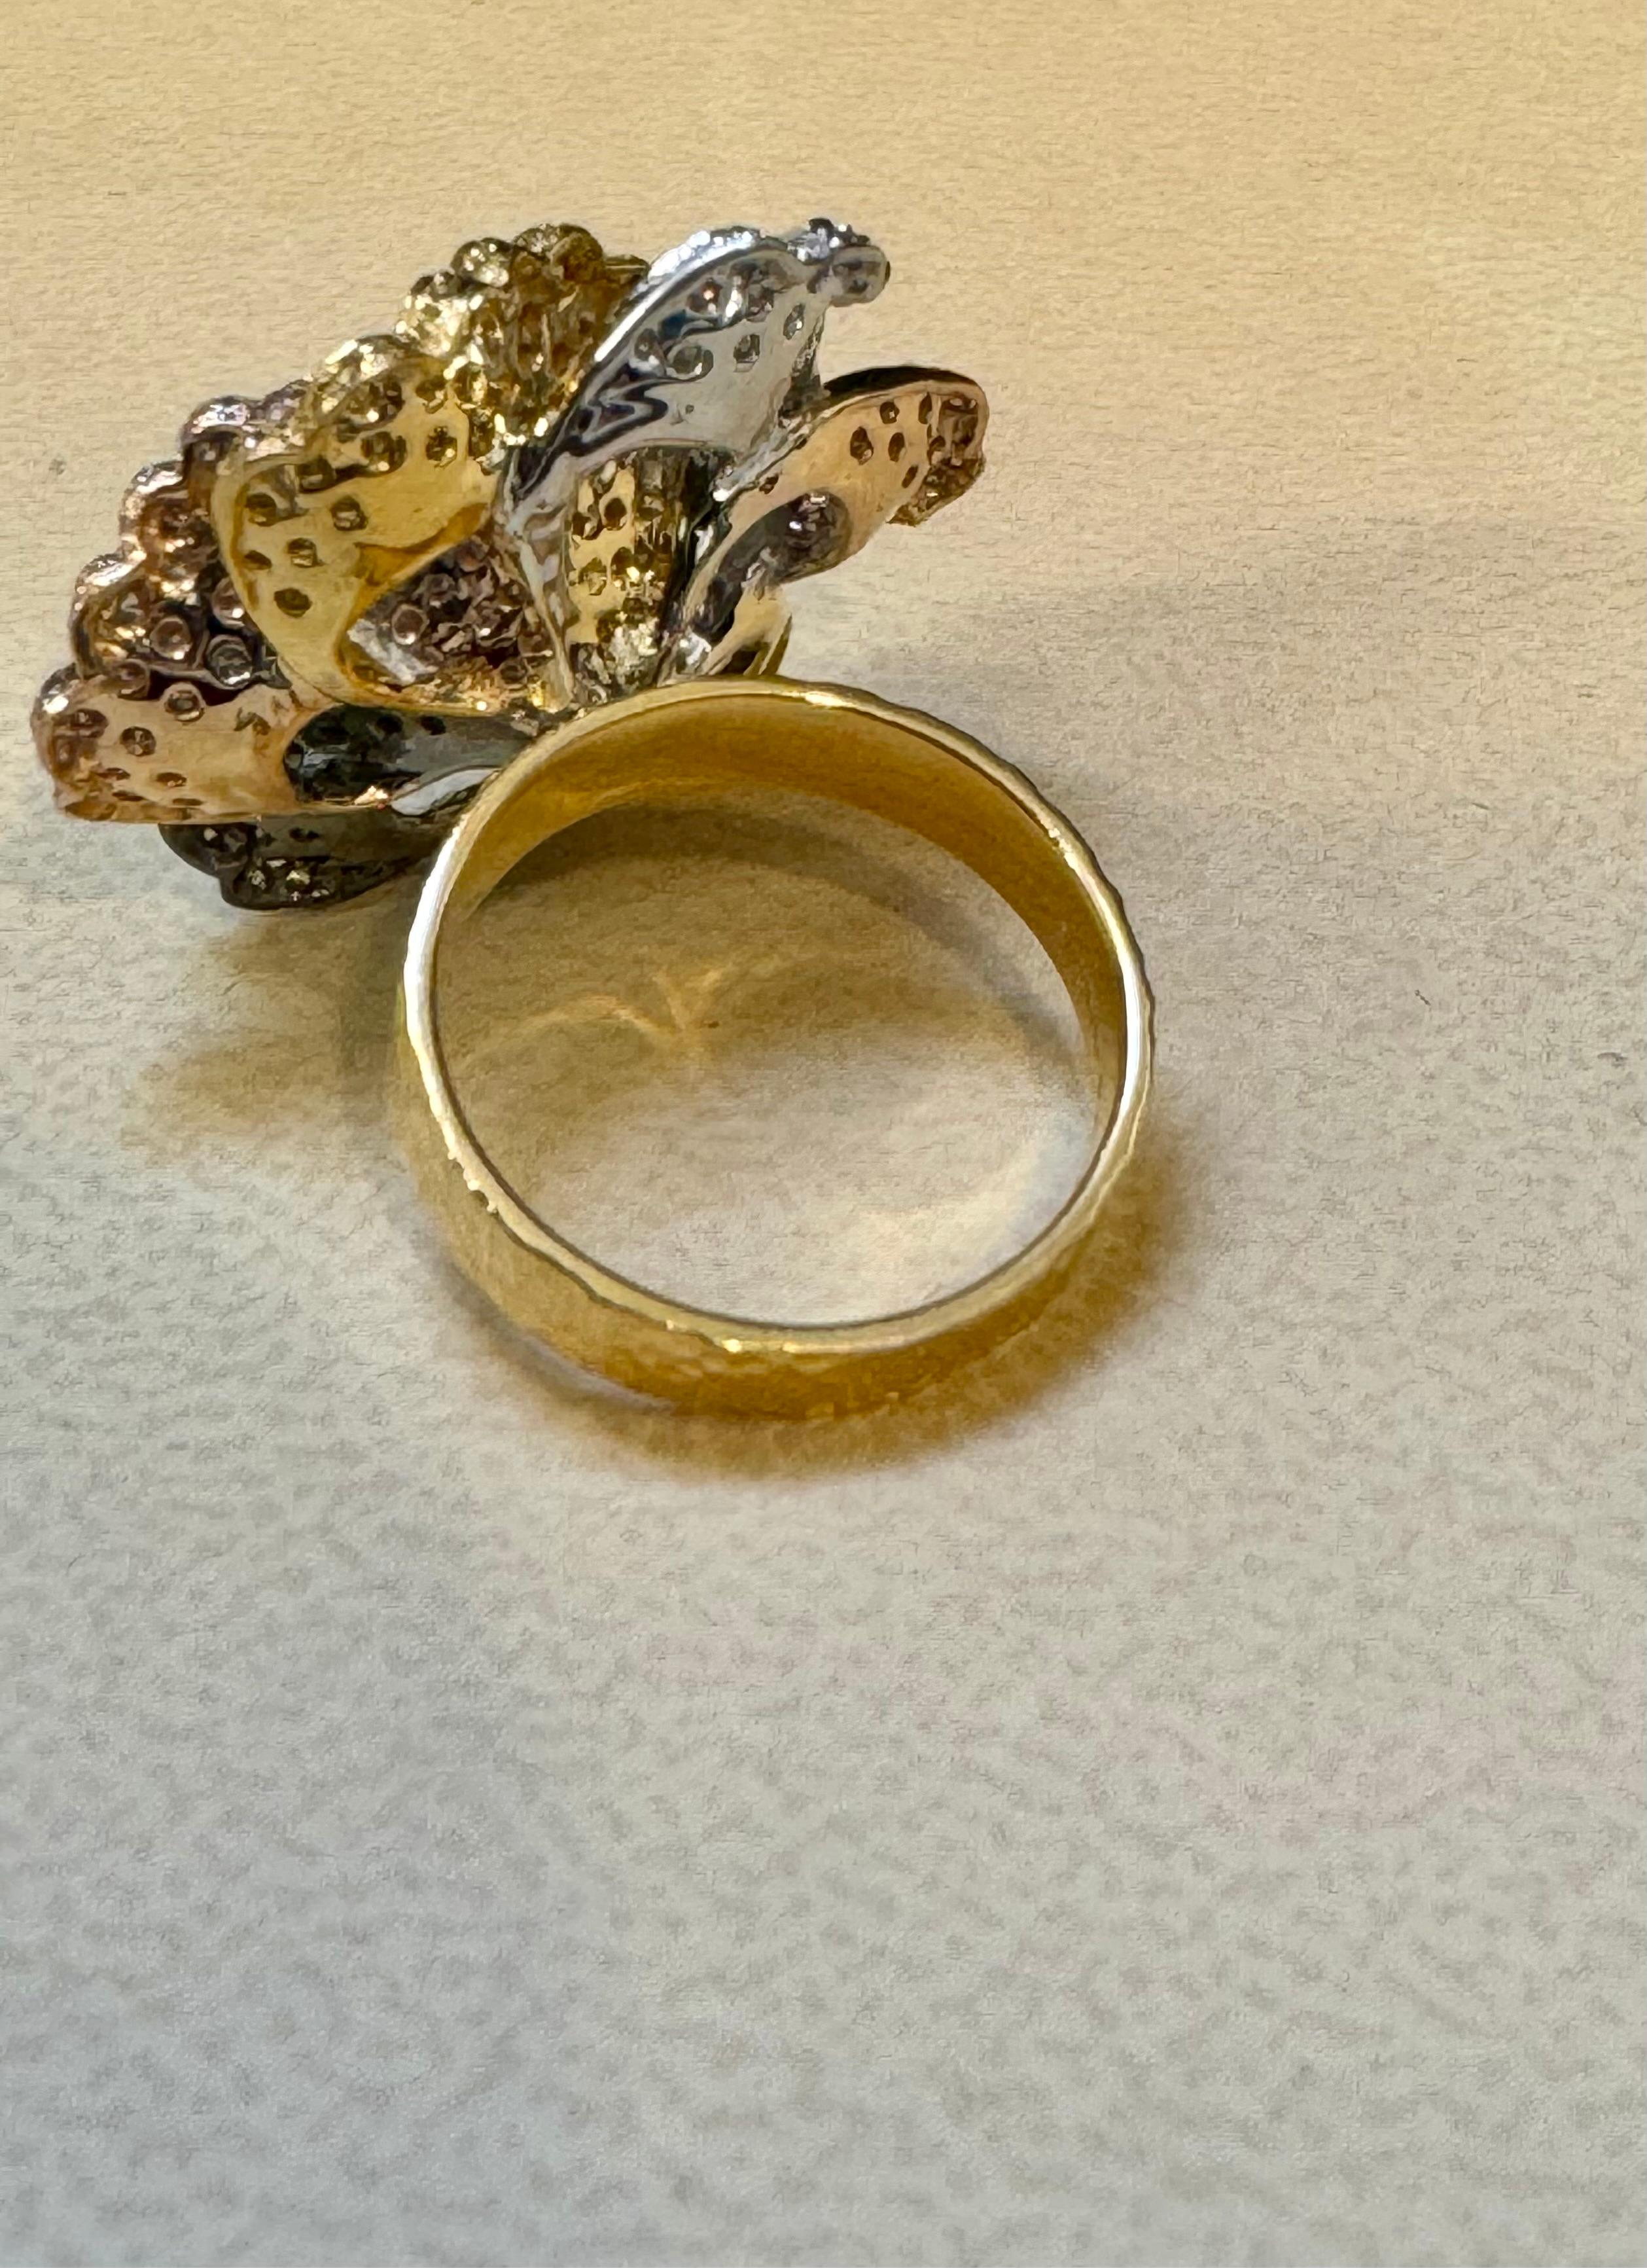 3 Ct Natural Fancy Color Diamond Flower Ring in 18 Karat Multi Color Gold Size 6 In Excellent Condition For Sale In New York, NY